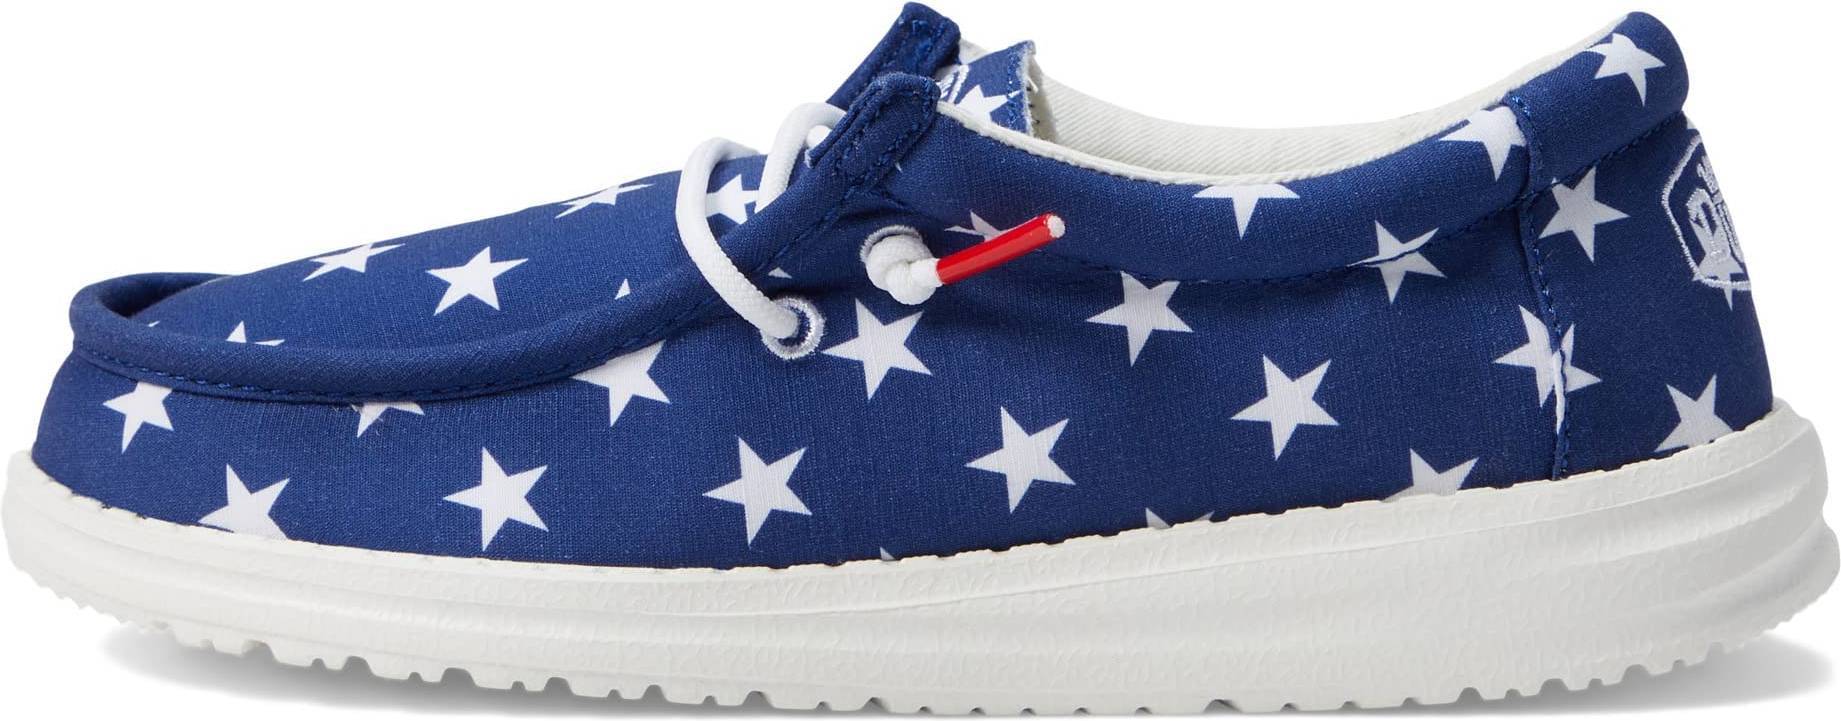 Hey Dude Wally Youth Patriotic American Flag Boys Shoes Multi-Colored ...